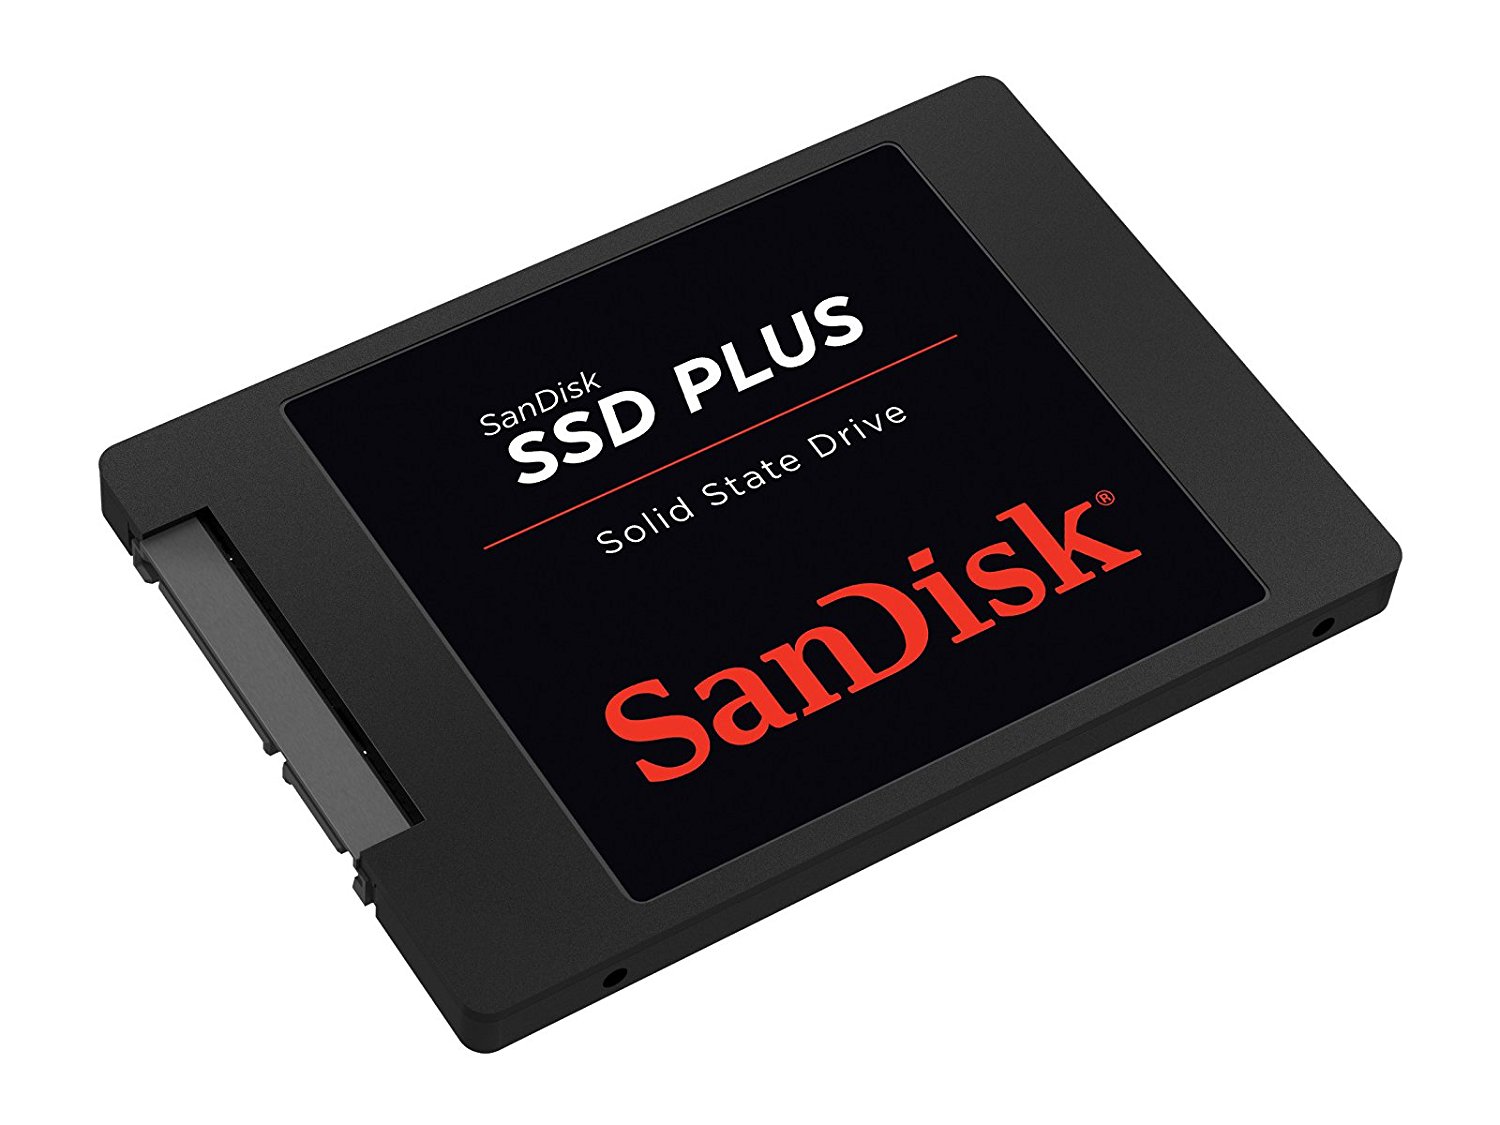 SanDisk 120GB Solid State Drive